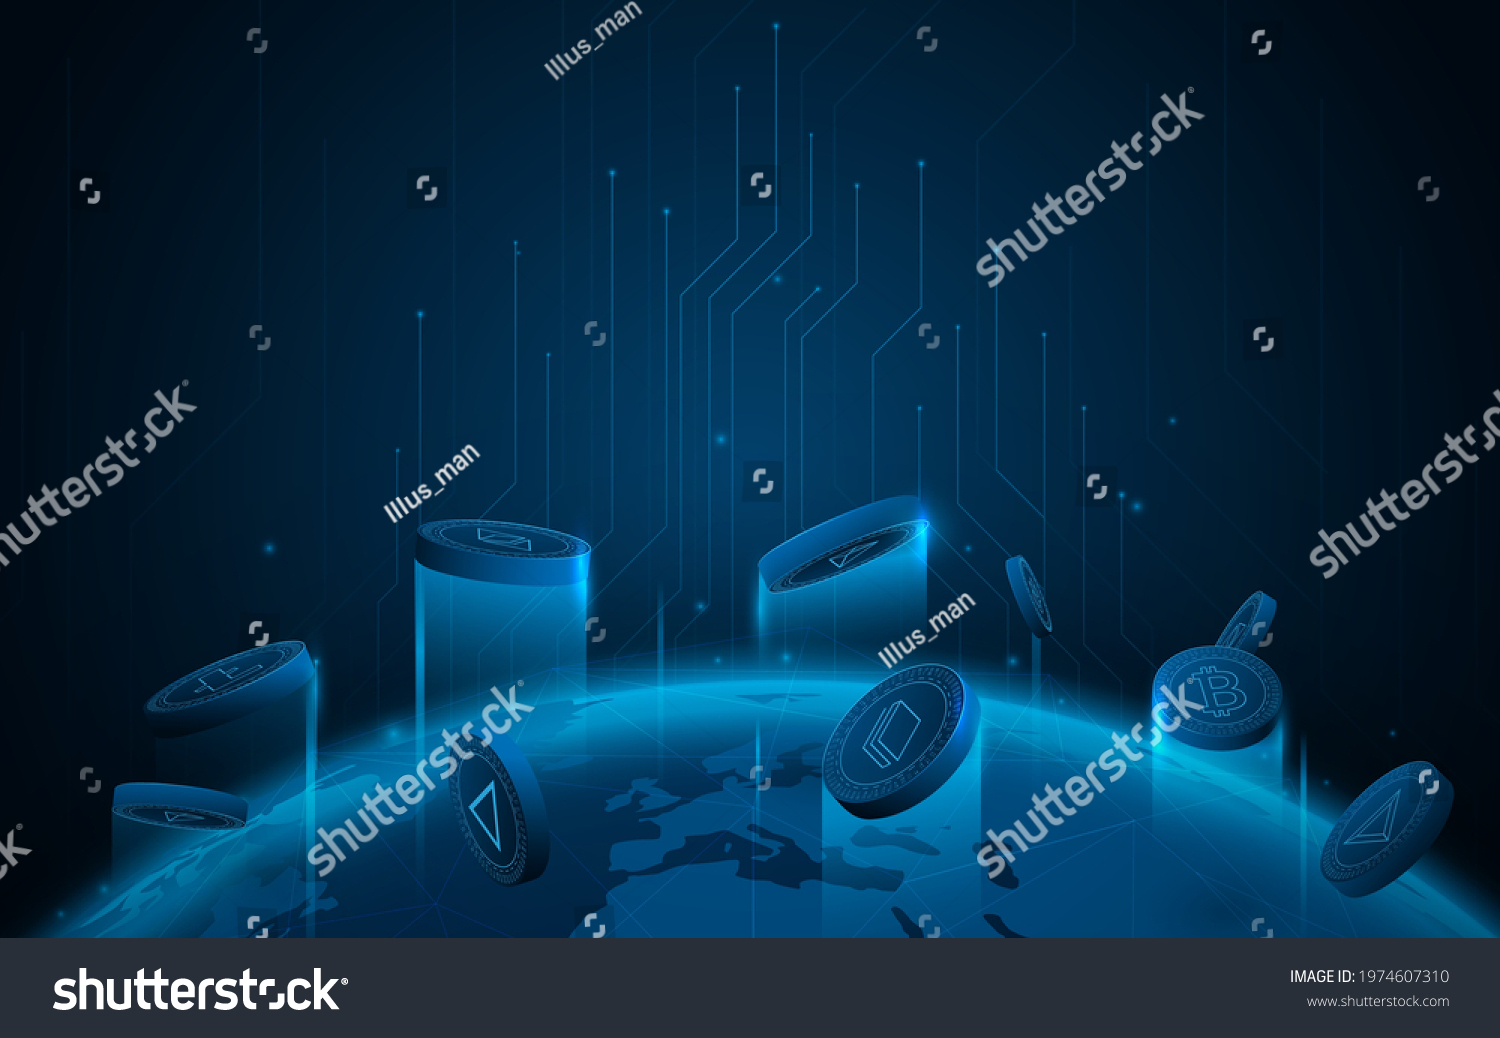 SVG of Cryptocurrency coins 3D flying on Global world communication technology for finance, blockchain. Vector illustration svg